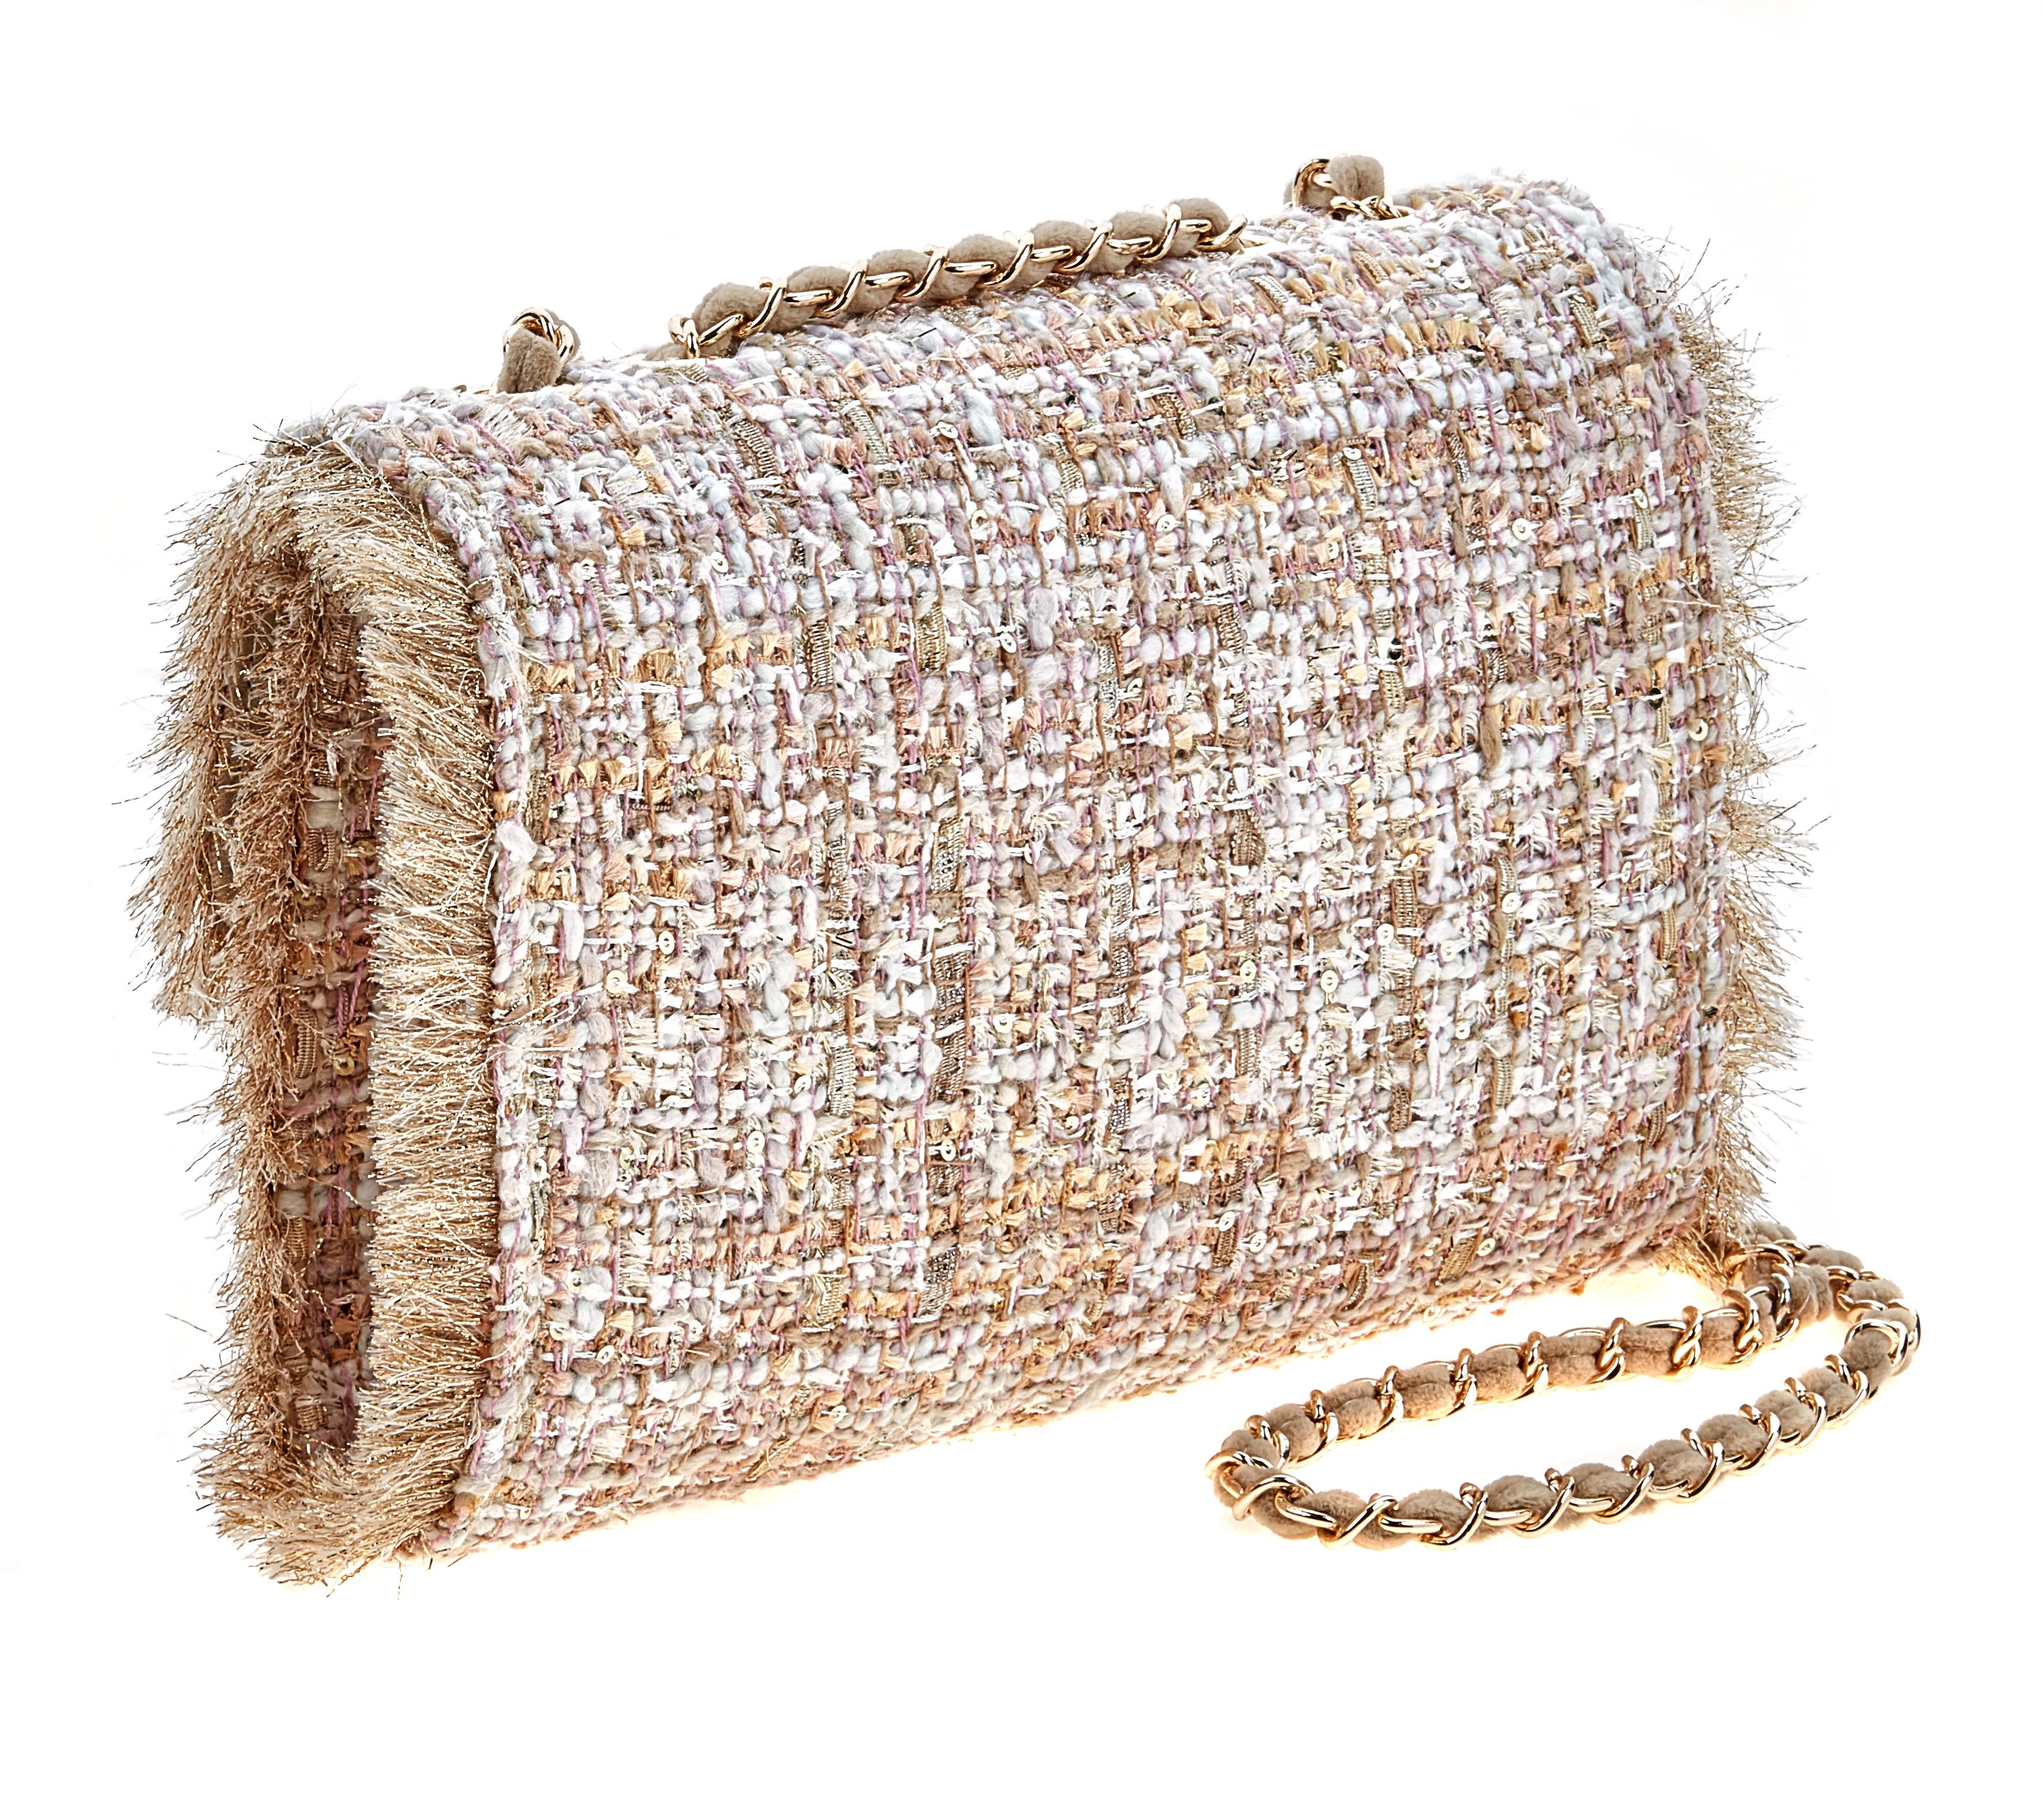 The Brielle is a classic flap bag with a plush felt woven through the chain for a softer and more elegant look.
DESCRIPTION
Fold-over flap with turn-lock closure
Tweed w/fringed edges
Non-removable woven velvet chain crossbody strap
Zippered